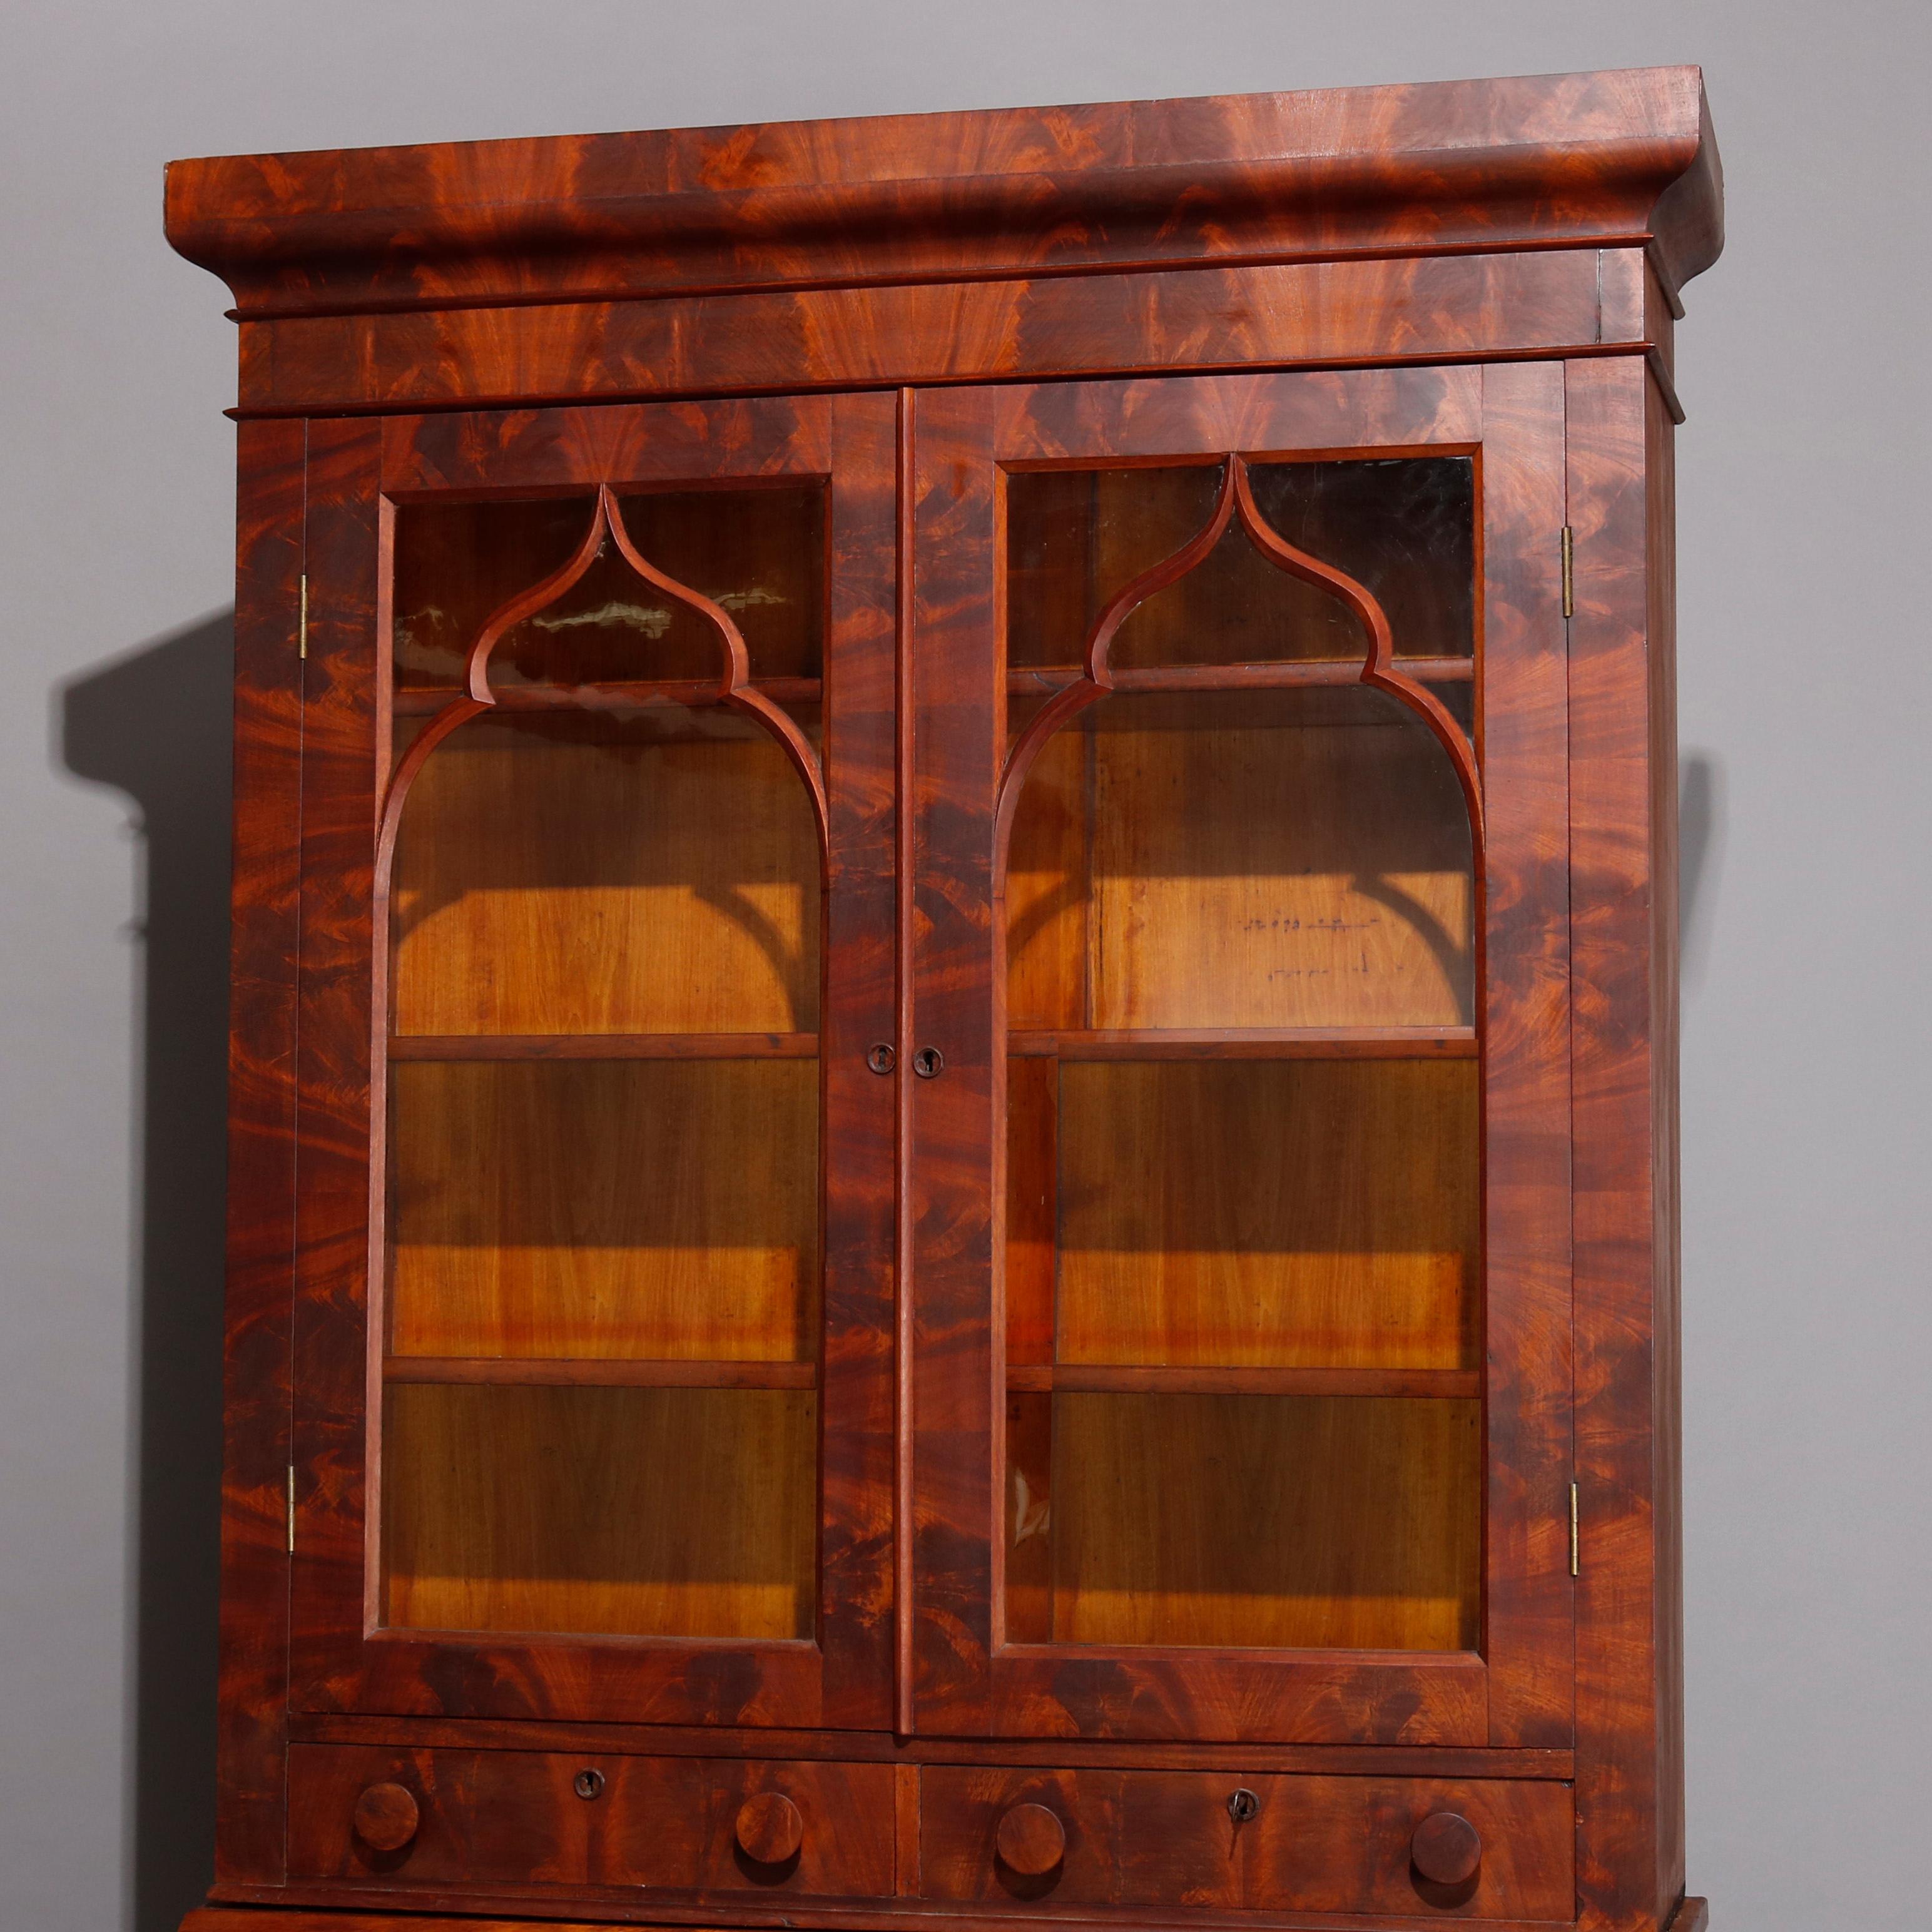 An antique American Empire secretary offers deeply striated flame mahogany construction with upper bookcase having double glass doors with arch form filigree and two drawers surmounting lower case with drop front desk over ogee frieze drawer and two